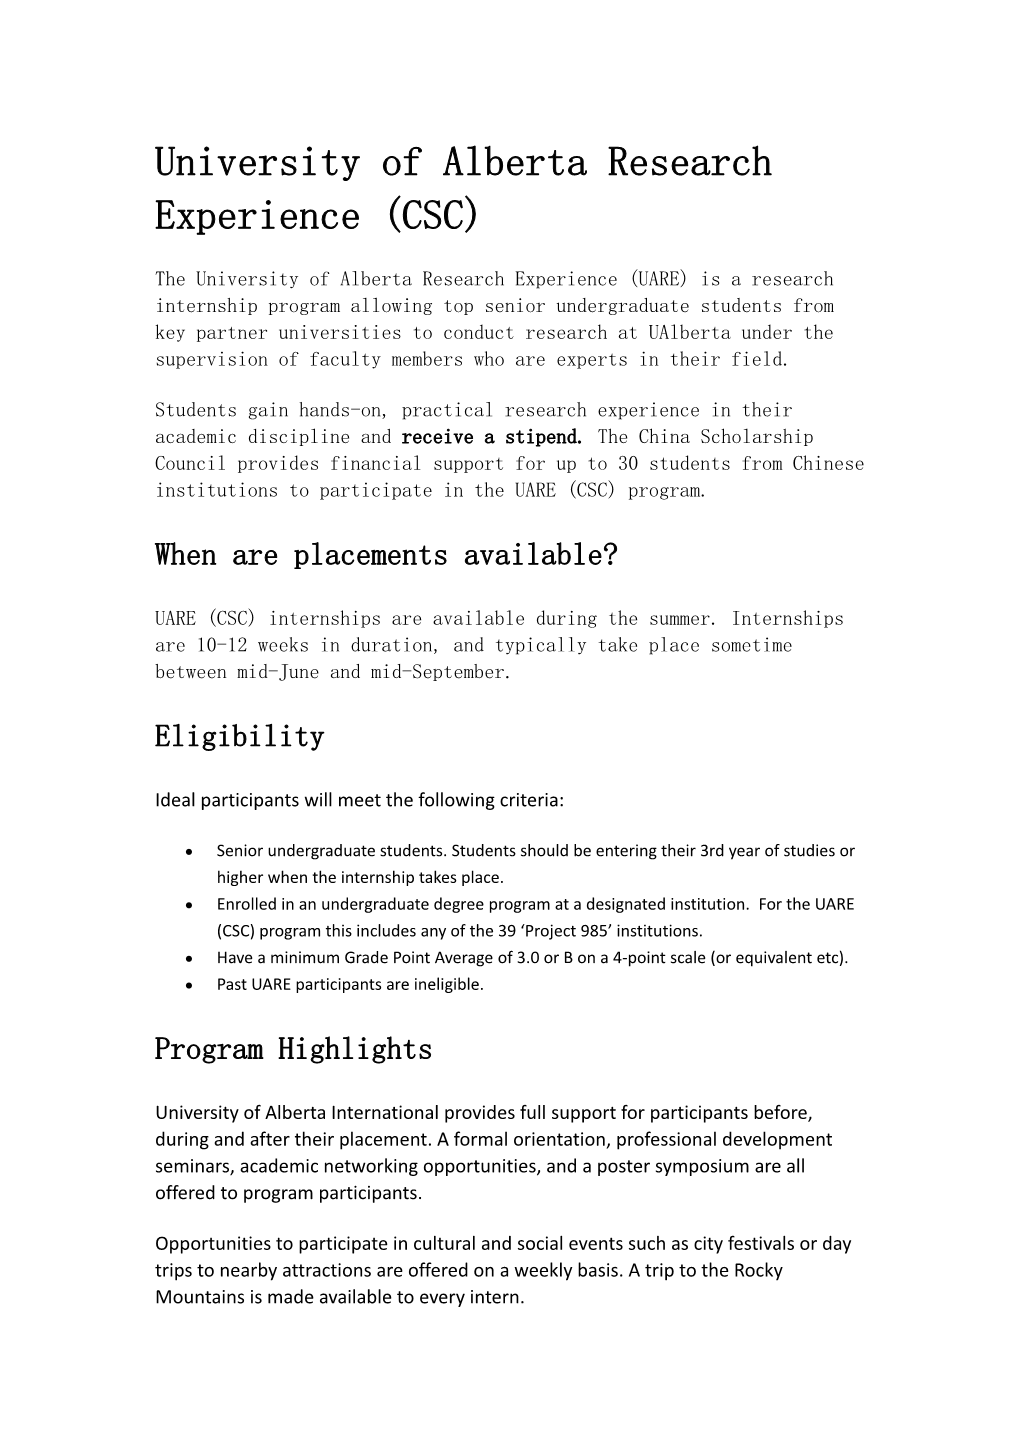 University of Alberta Research Experience (CSC)